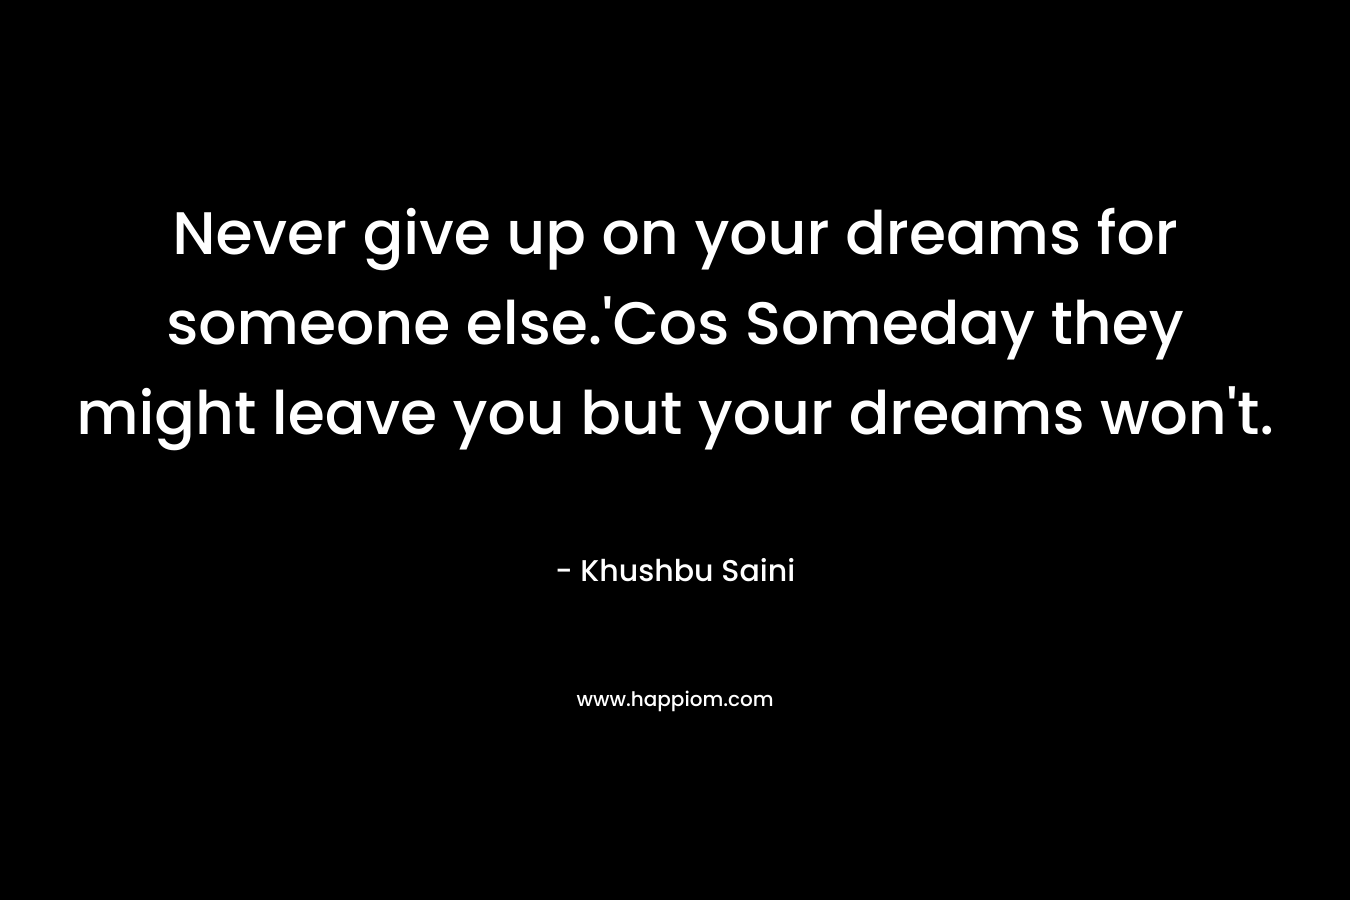 Never give up on your dreams for someone else.'Cos Someday they might leave you but your dreams won't.